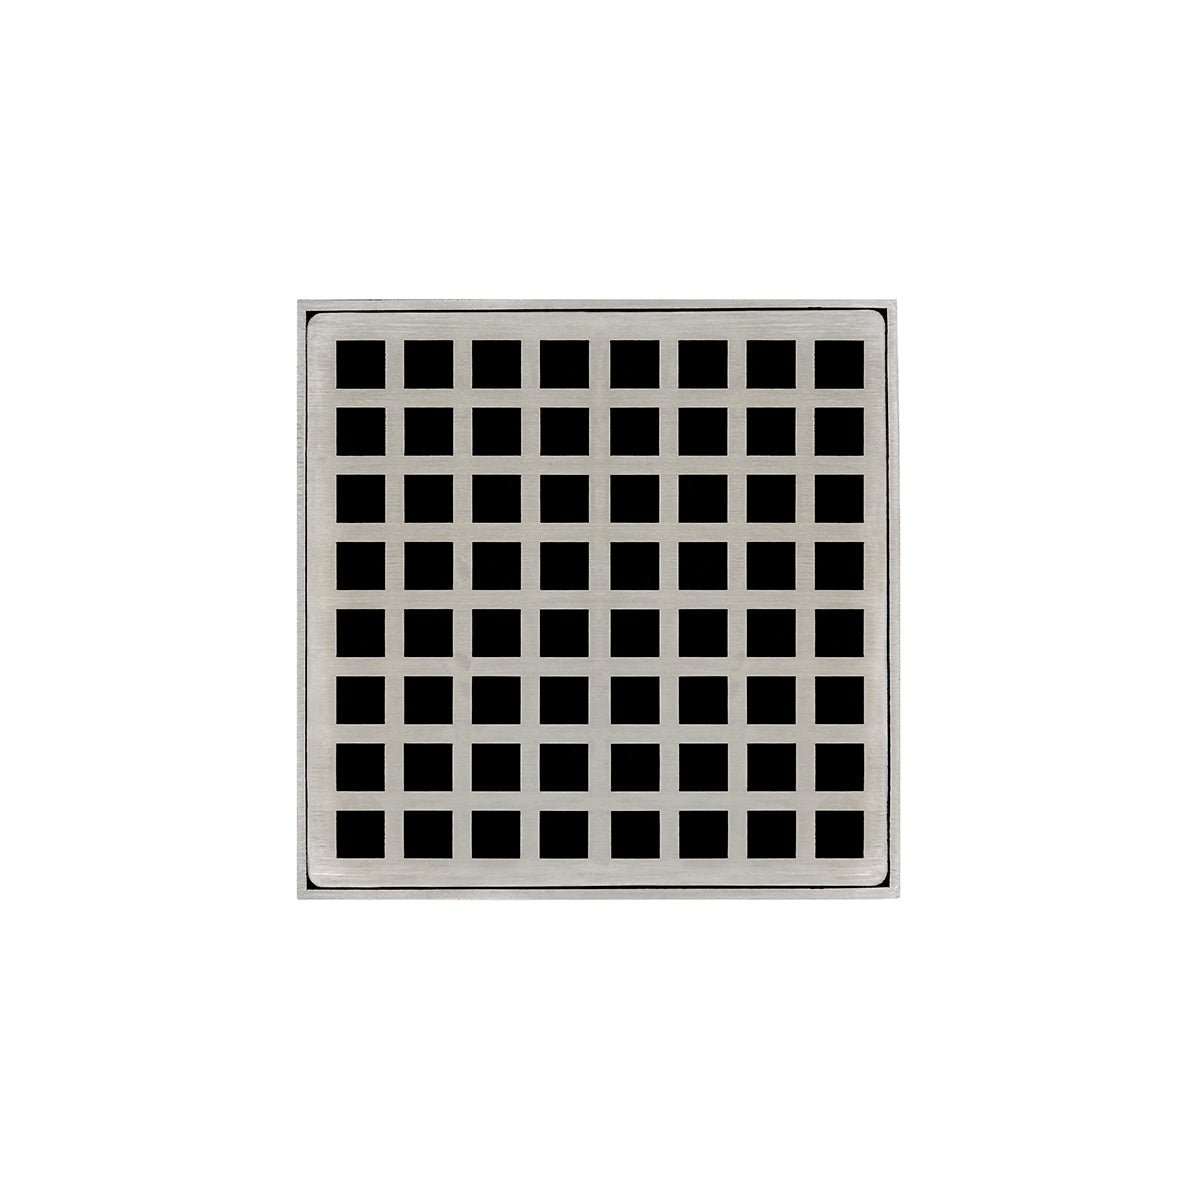 Infinity Drain 5" x 5" QDB 5 Premium Center Drain Kit with Squares Pattern Decorative Plate with PVC Bonded Flange Drain Body, 2", 3" and 4" Outlet